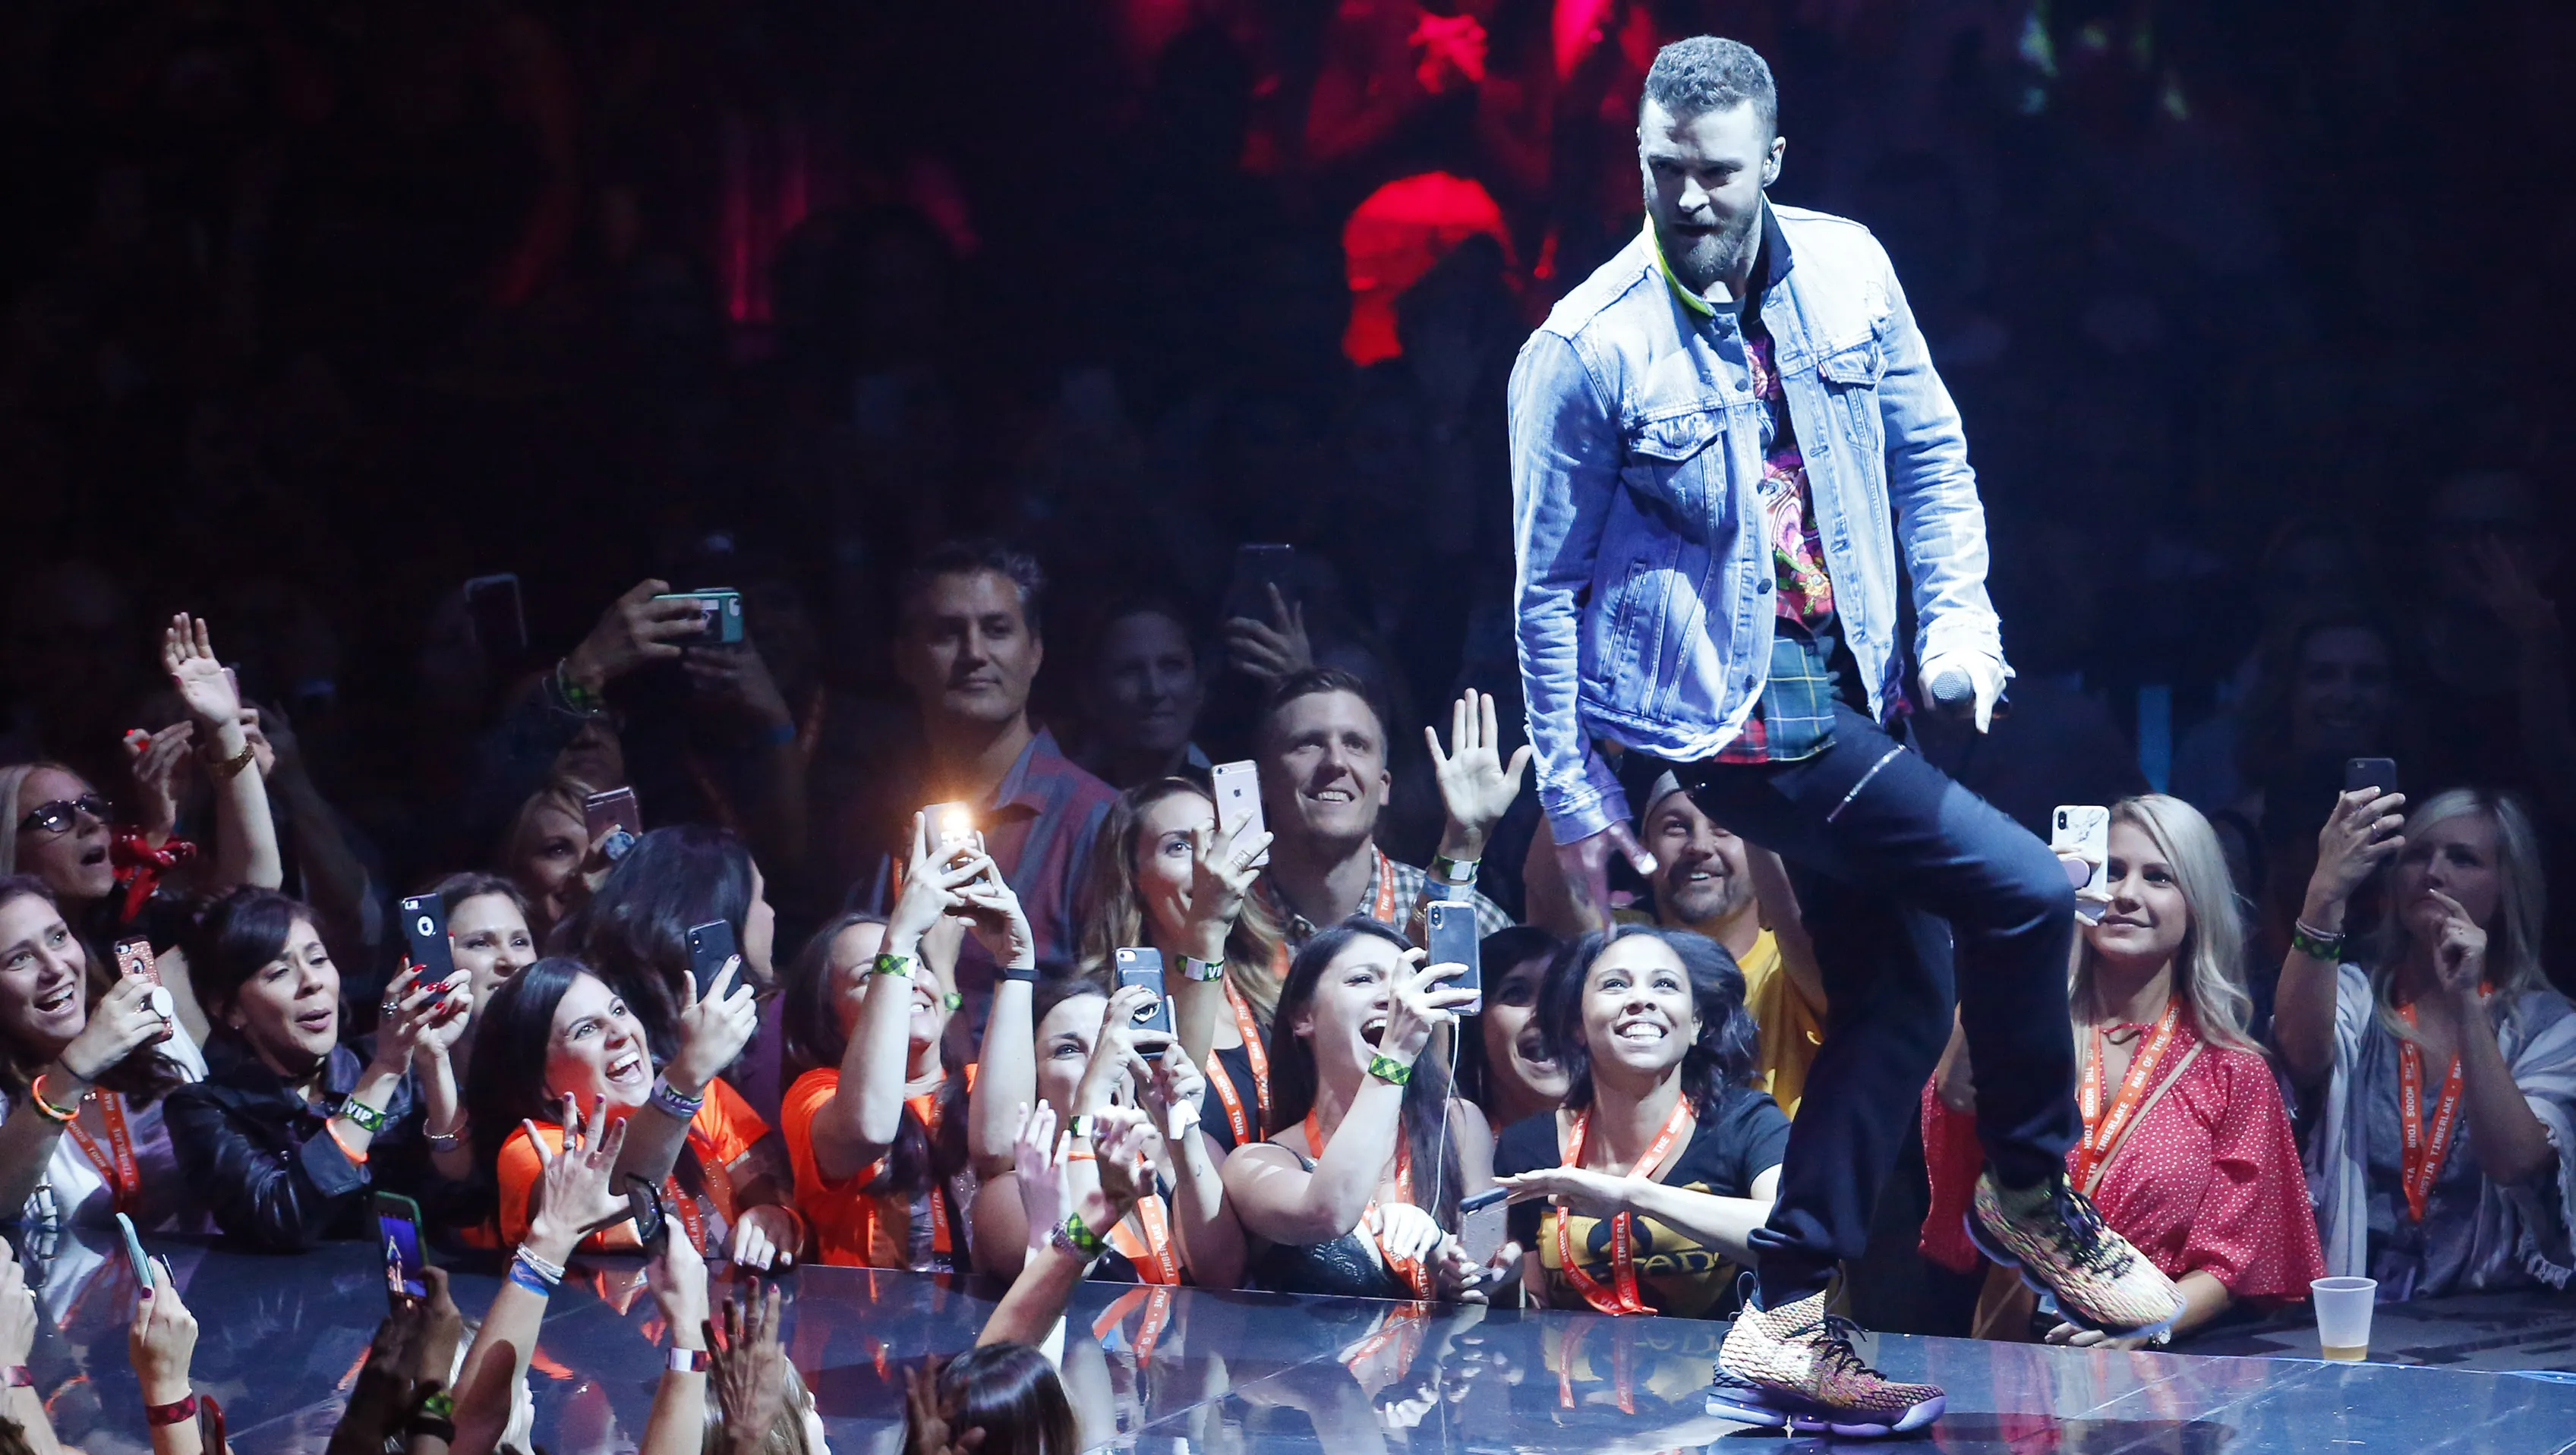 Justin Timberlake’s Electrifying Performance In Memphis Leaves Fans Ecstatic